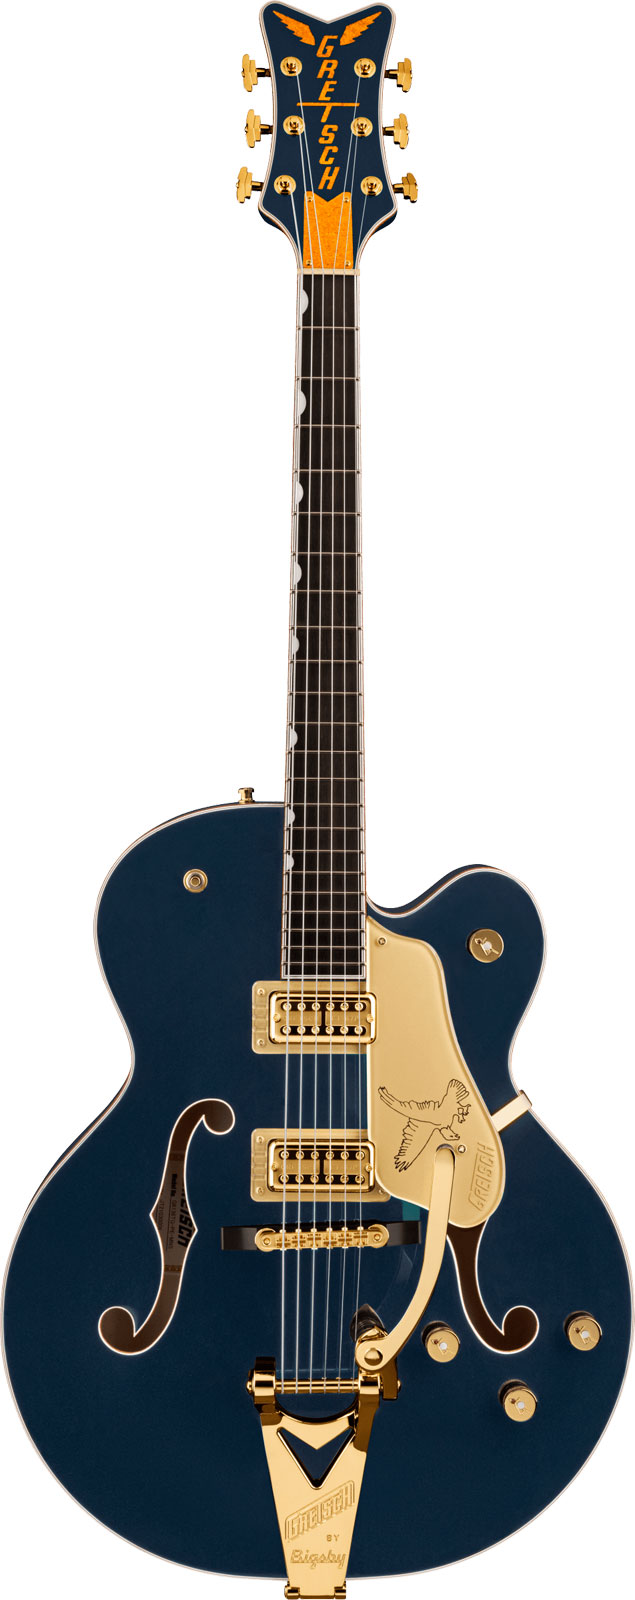 GRETSCH GUITARS G6136TG PLAYERS EDITION FALCON HOLLOW BODY WITH STRING-THRU BIGSBY AND GOLD HARDWARE EBO, MIDNIGHT S